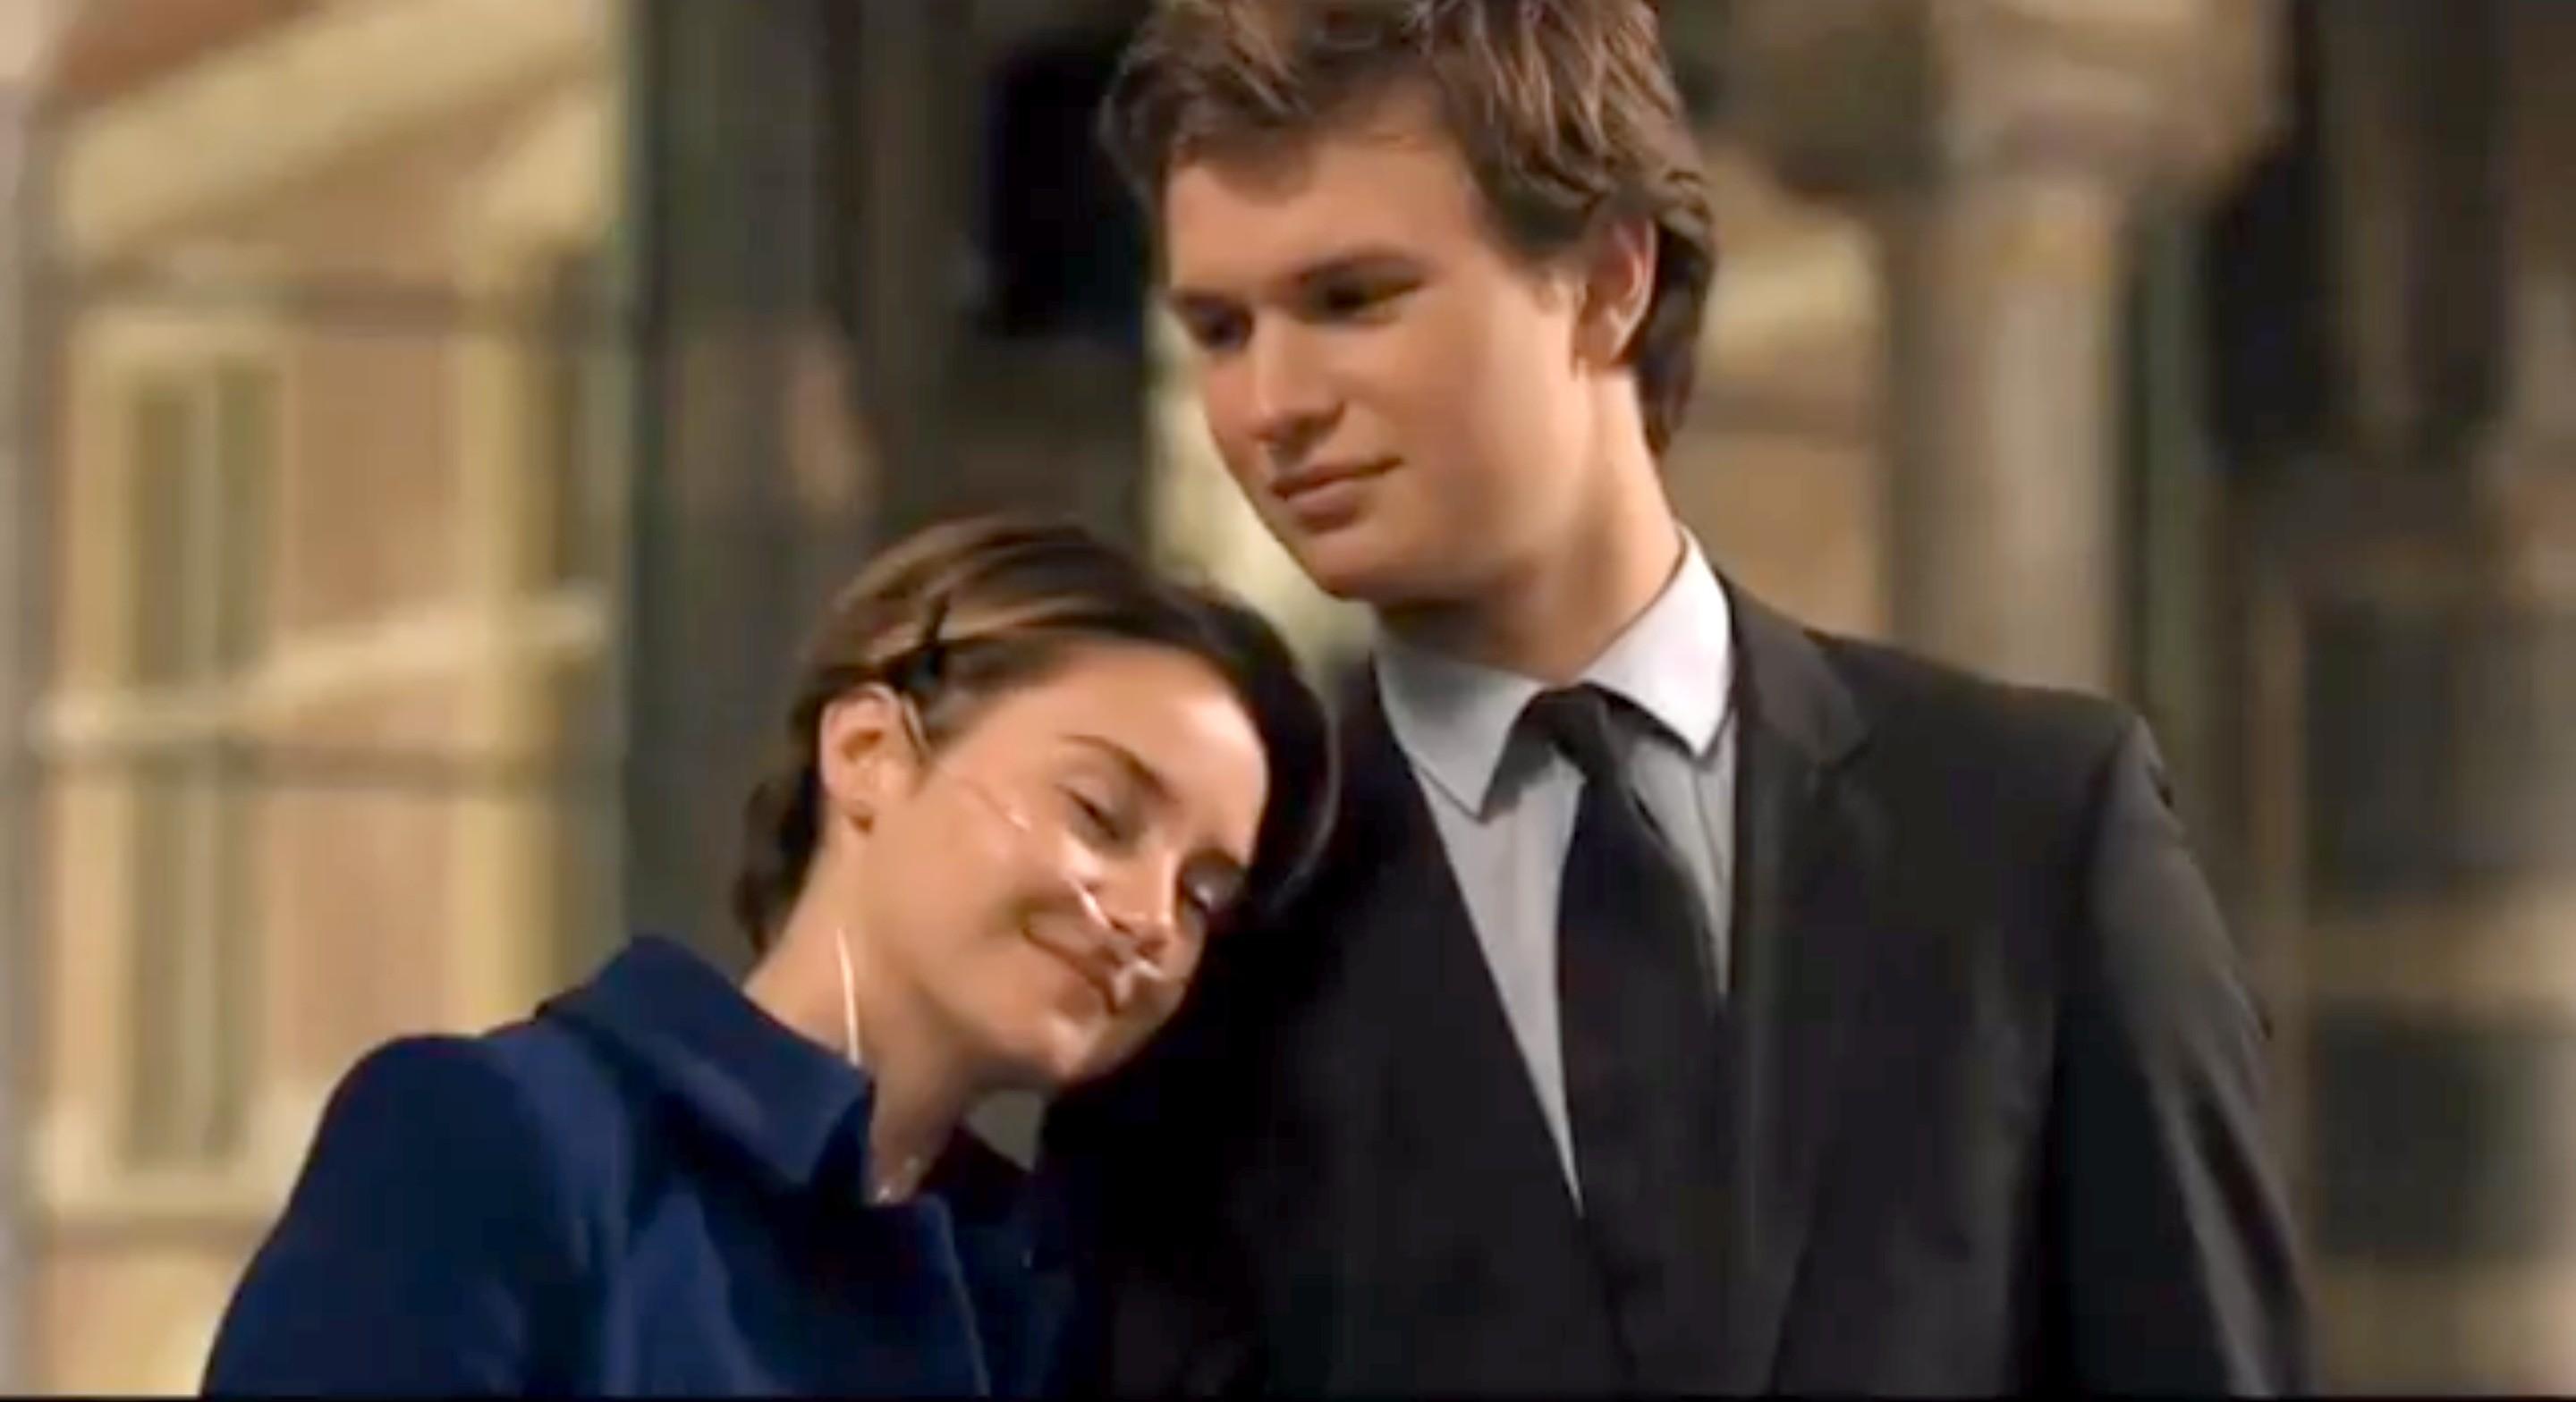 the fault in our stars hazel grace and augustus